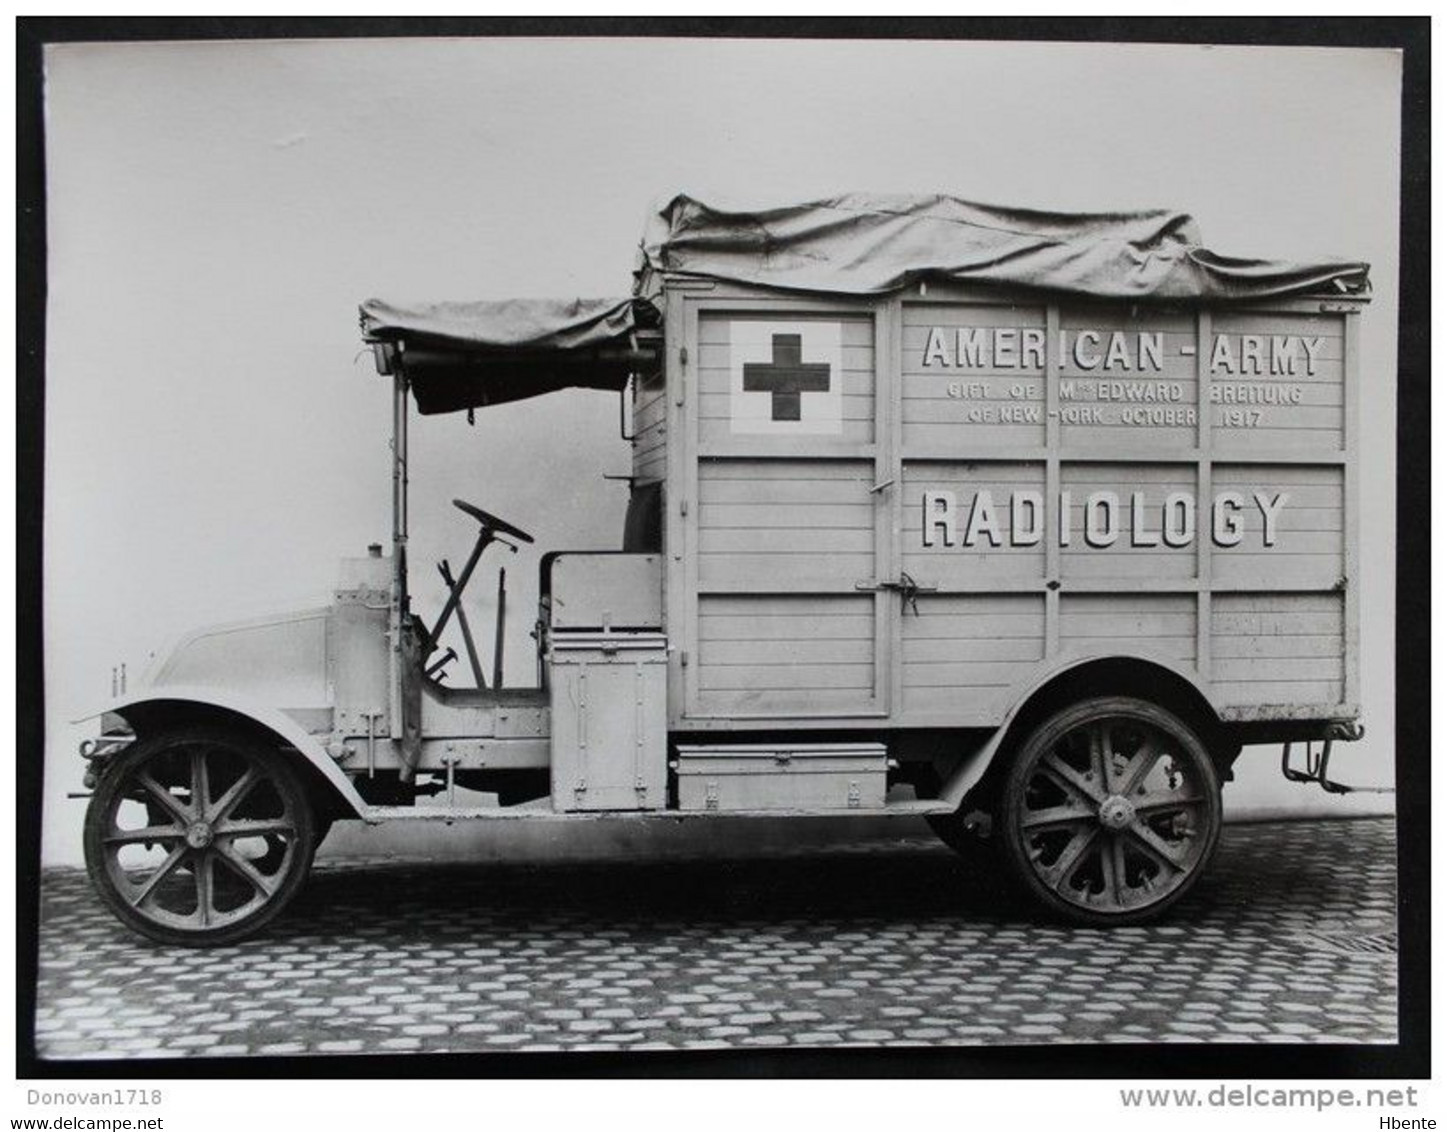 American Army Radiology - Gift Of Mrs Edward Breitung Of New York October 1917 - Petite Curie (Photo) - Automobile